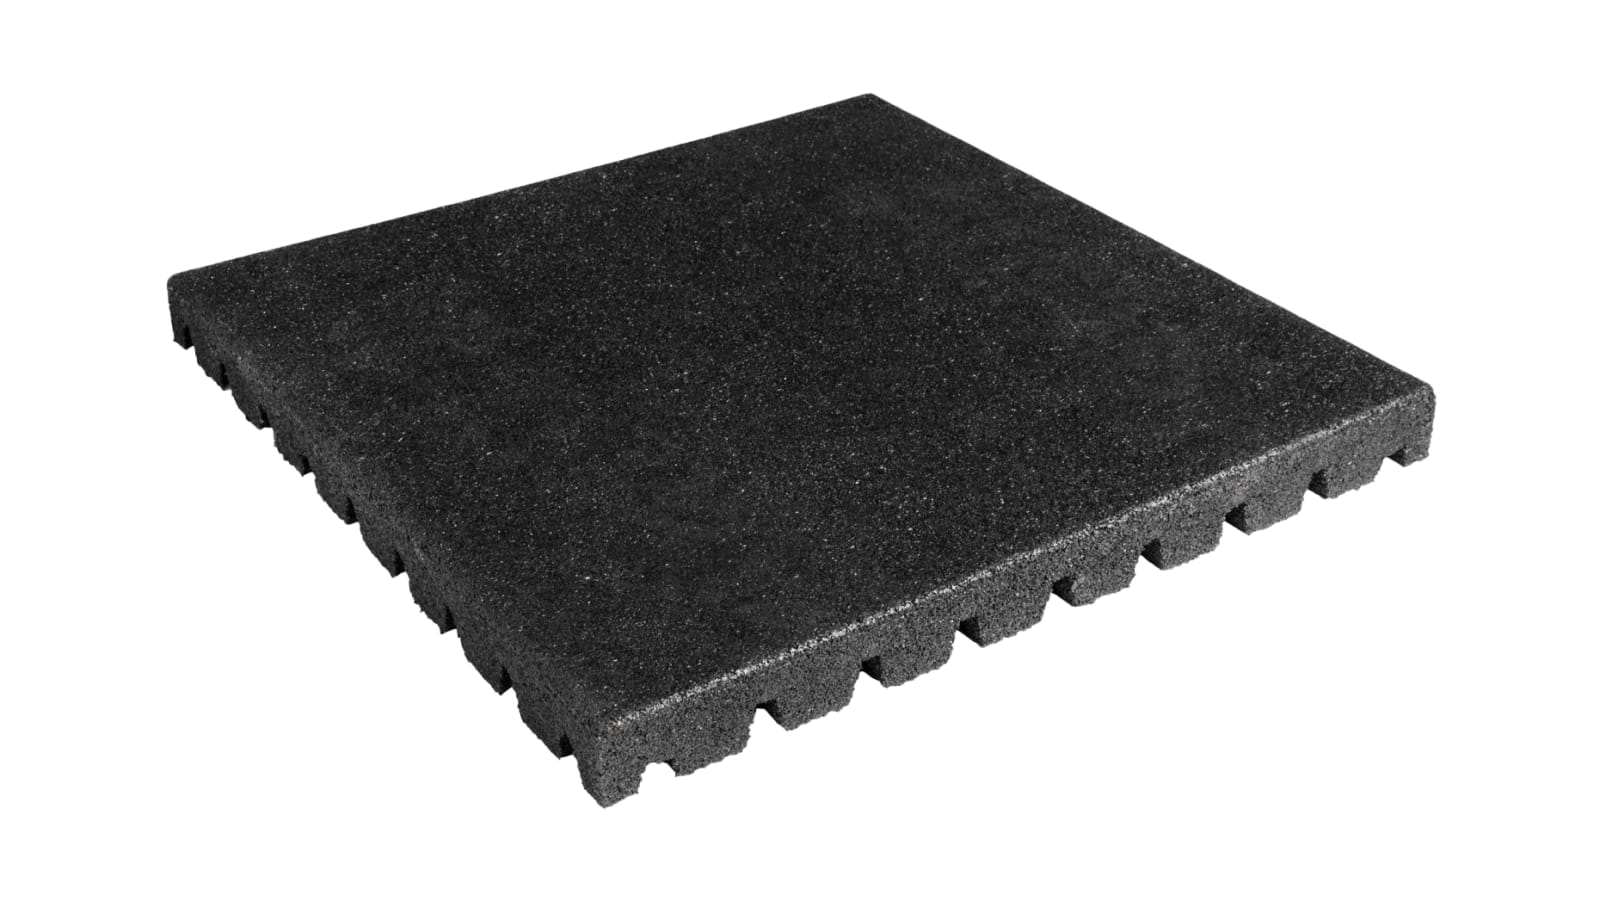 x1 Black with Blue Speckle Bodypower 30mm Floor Tile 500mm x 500mm 